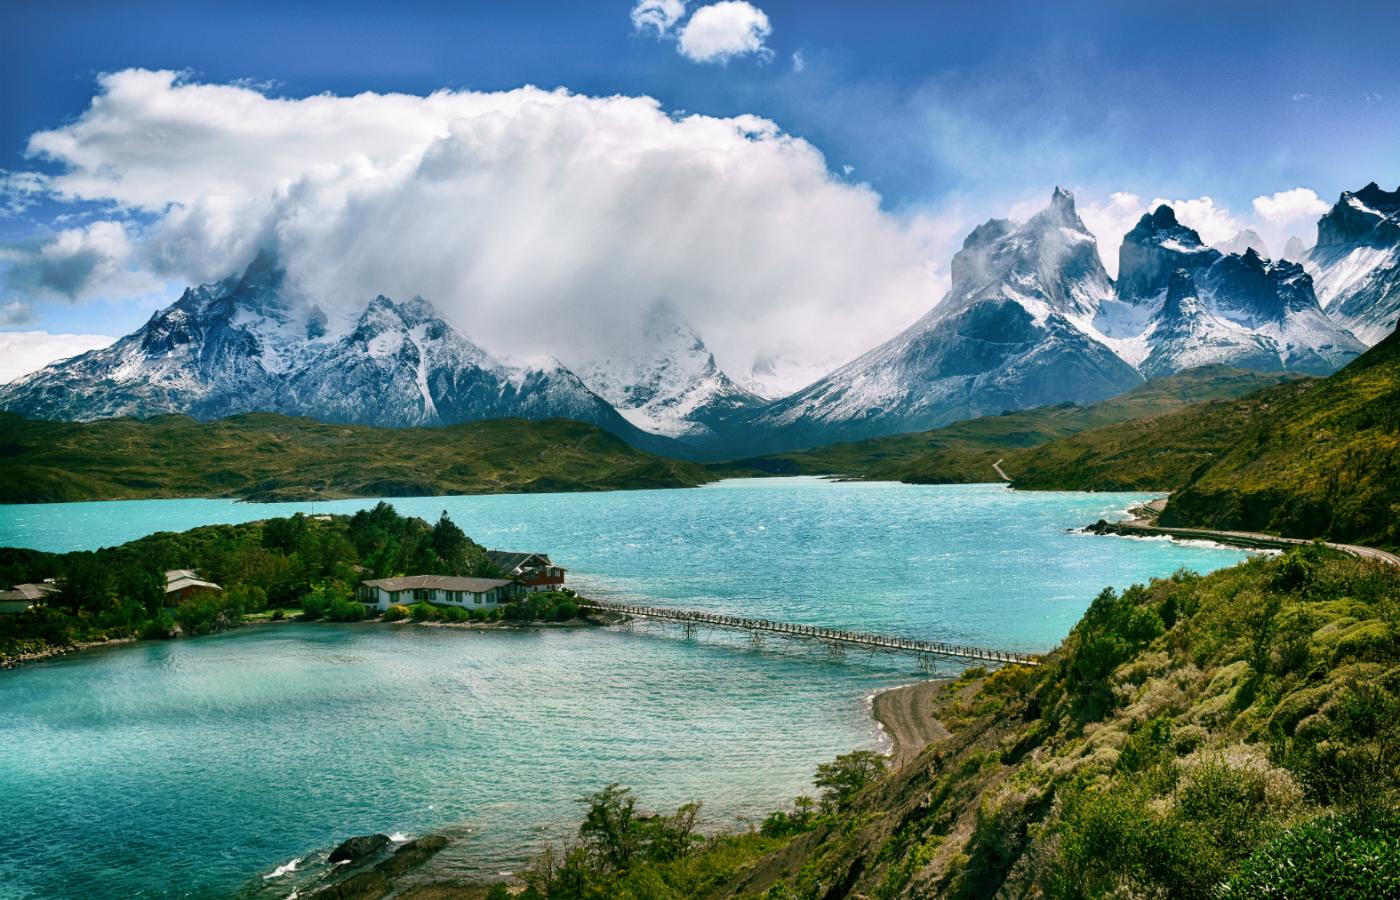 Park Narodowy Torres del Paine w Chile